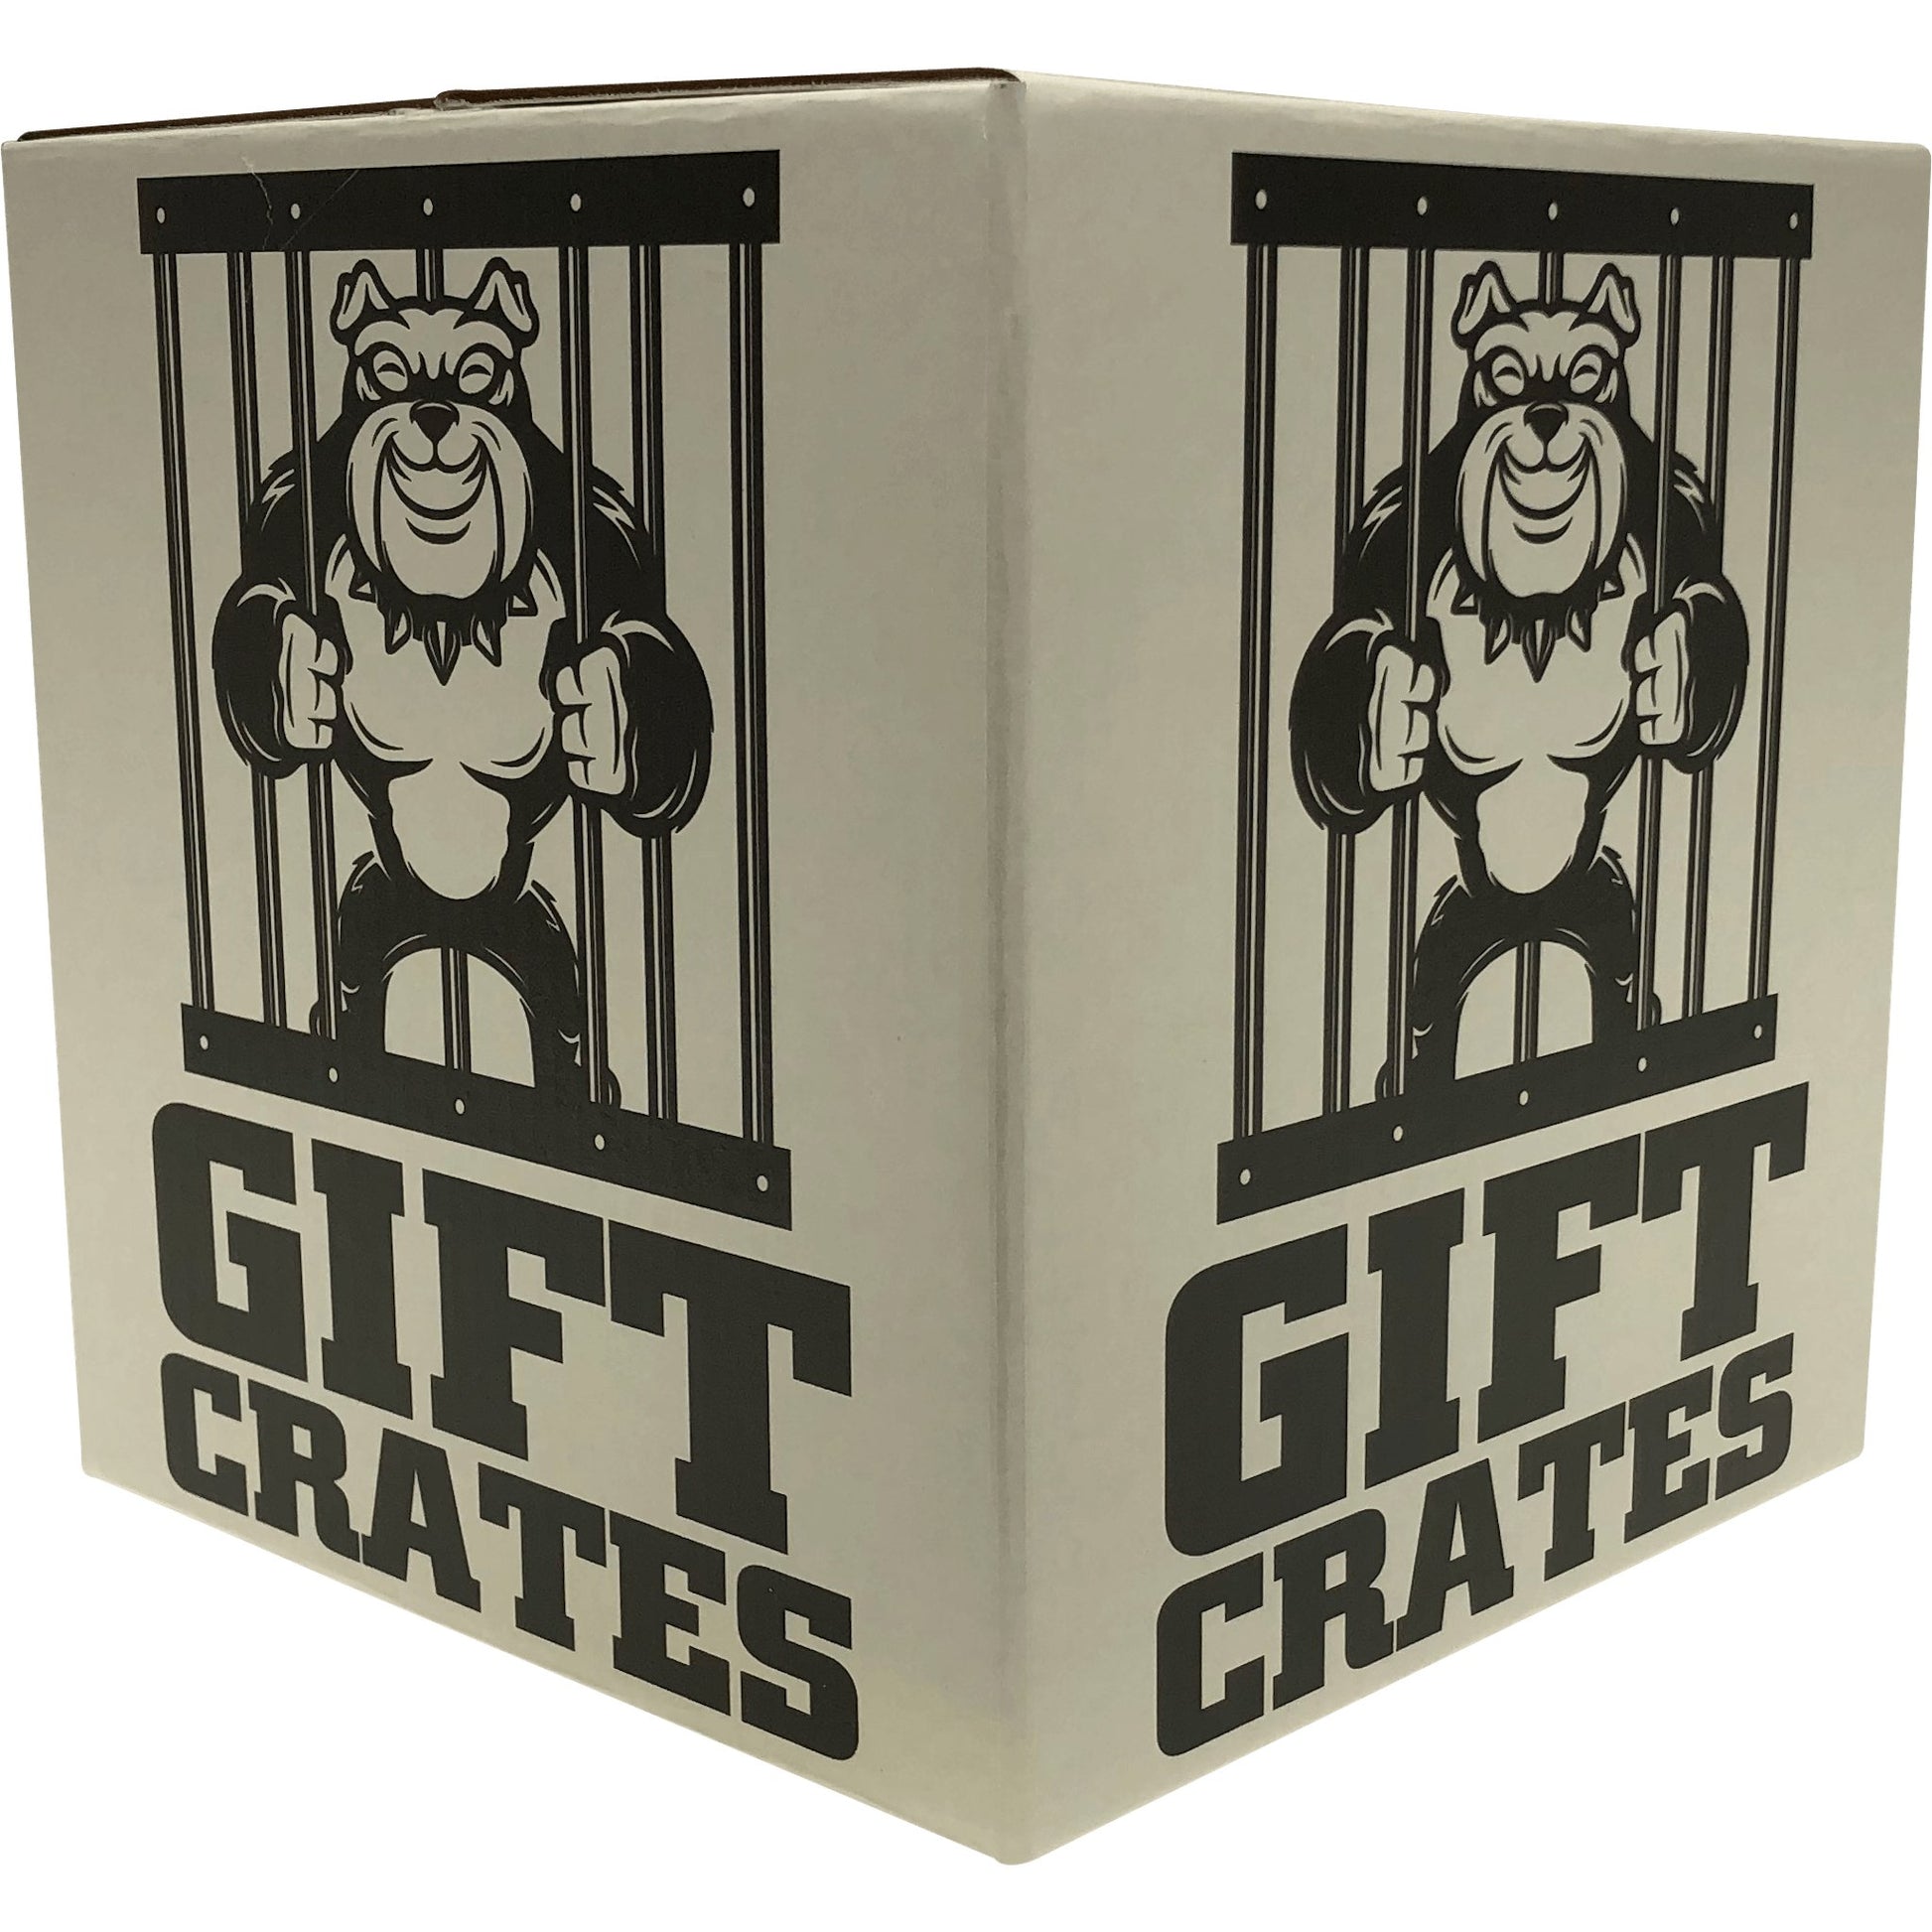 Jerky Snack Attack - Gift Crates